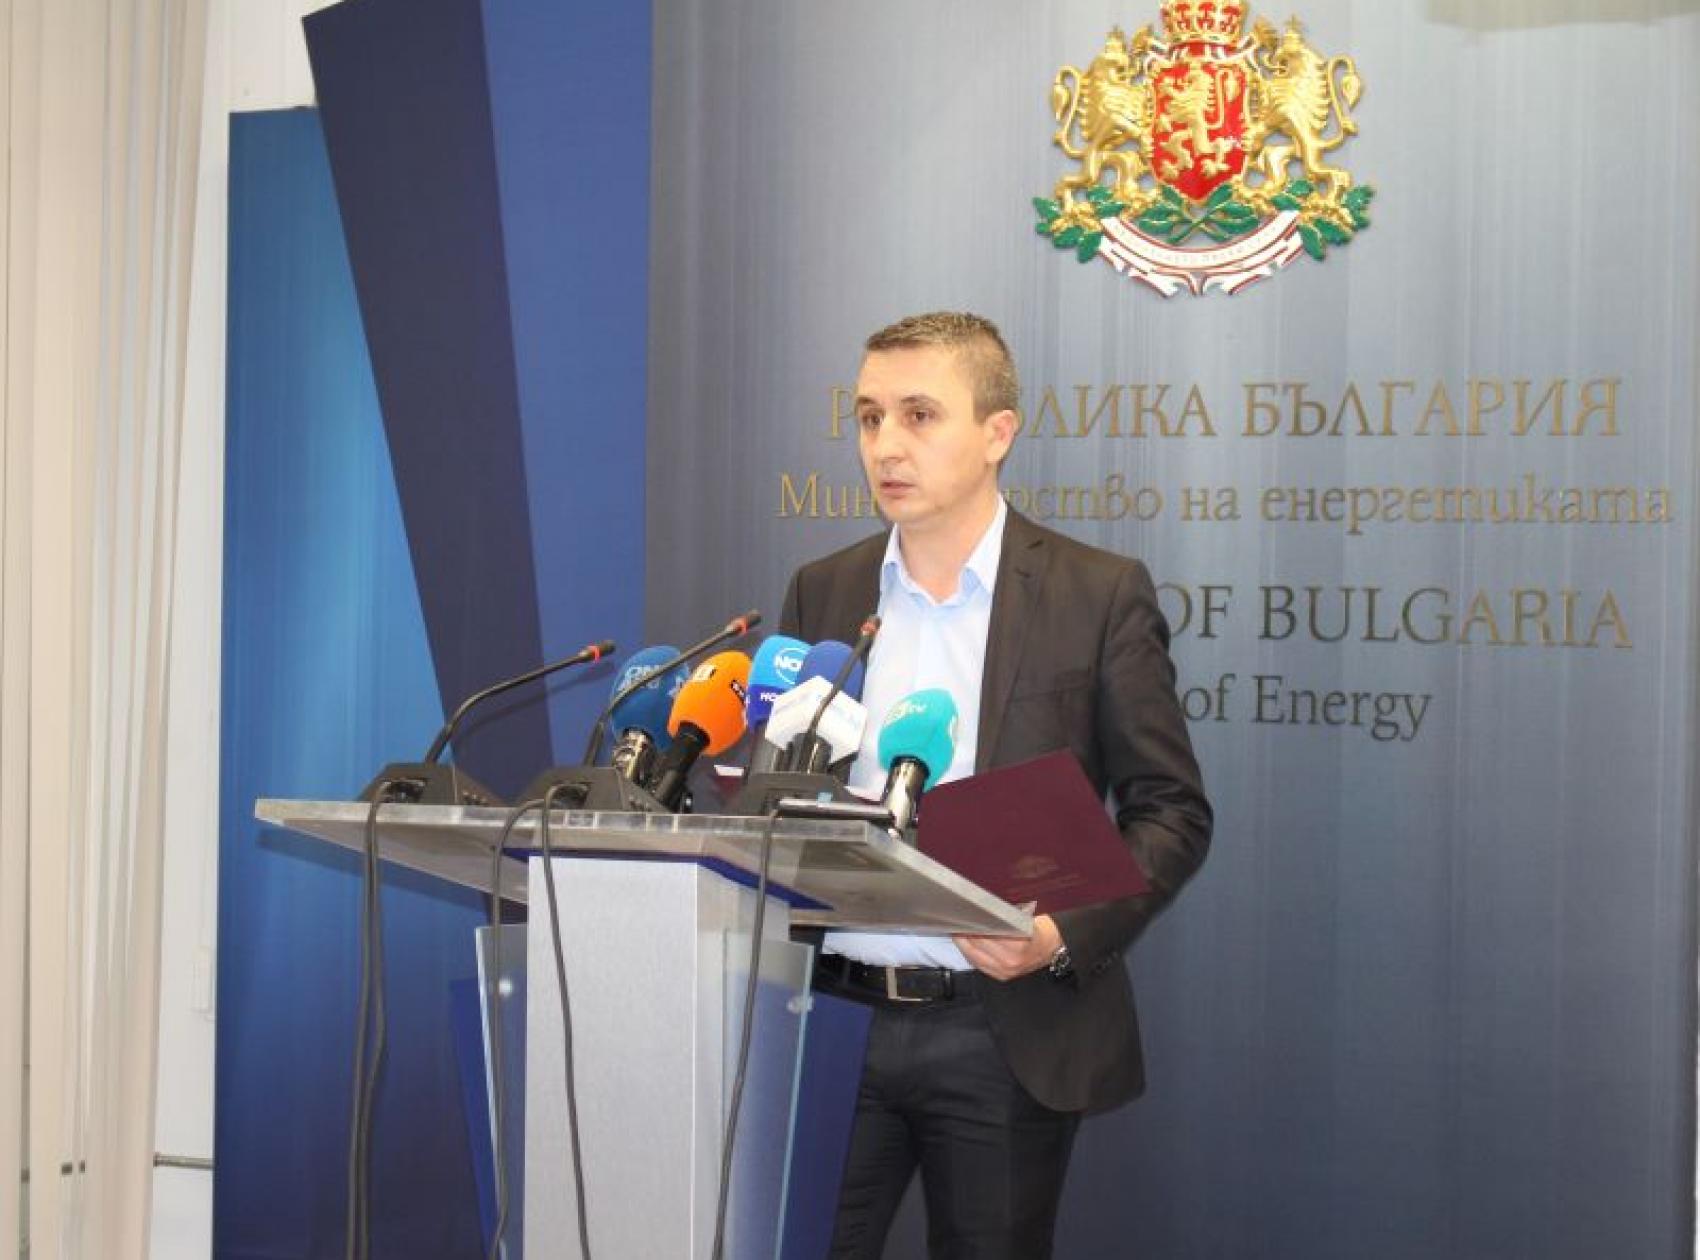 Alternative routes for gas supply in Bulgaria through Greece and